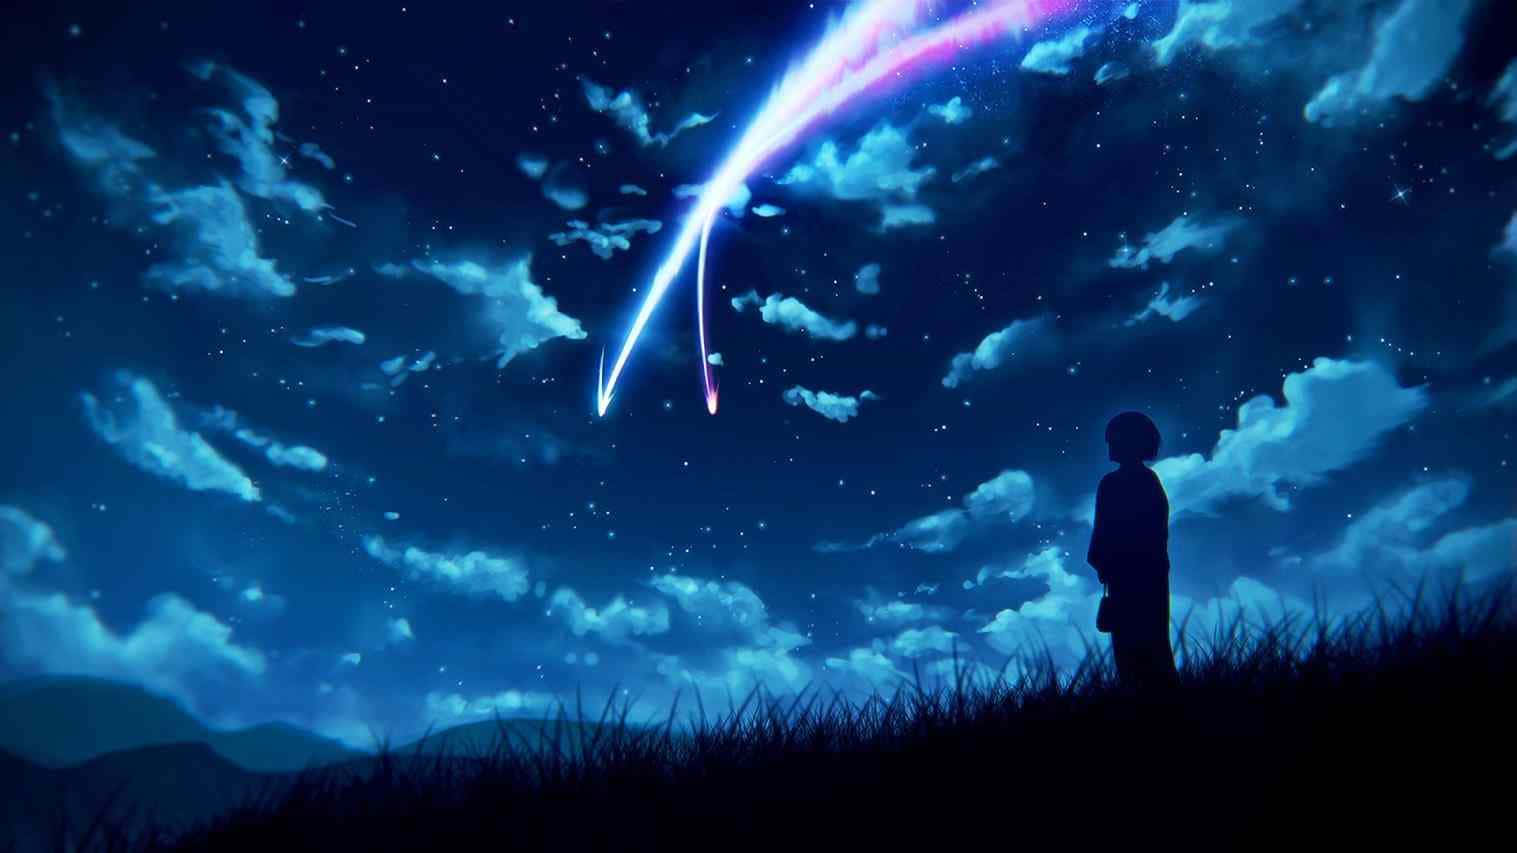 100+] Cool Anime Blue Wallpapers